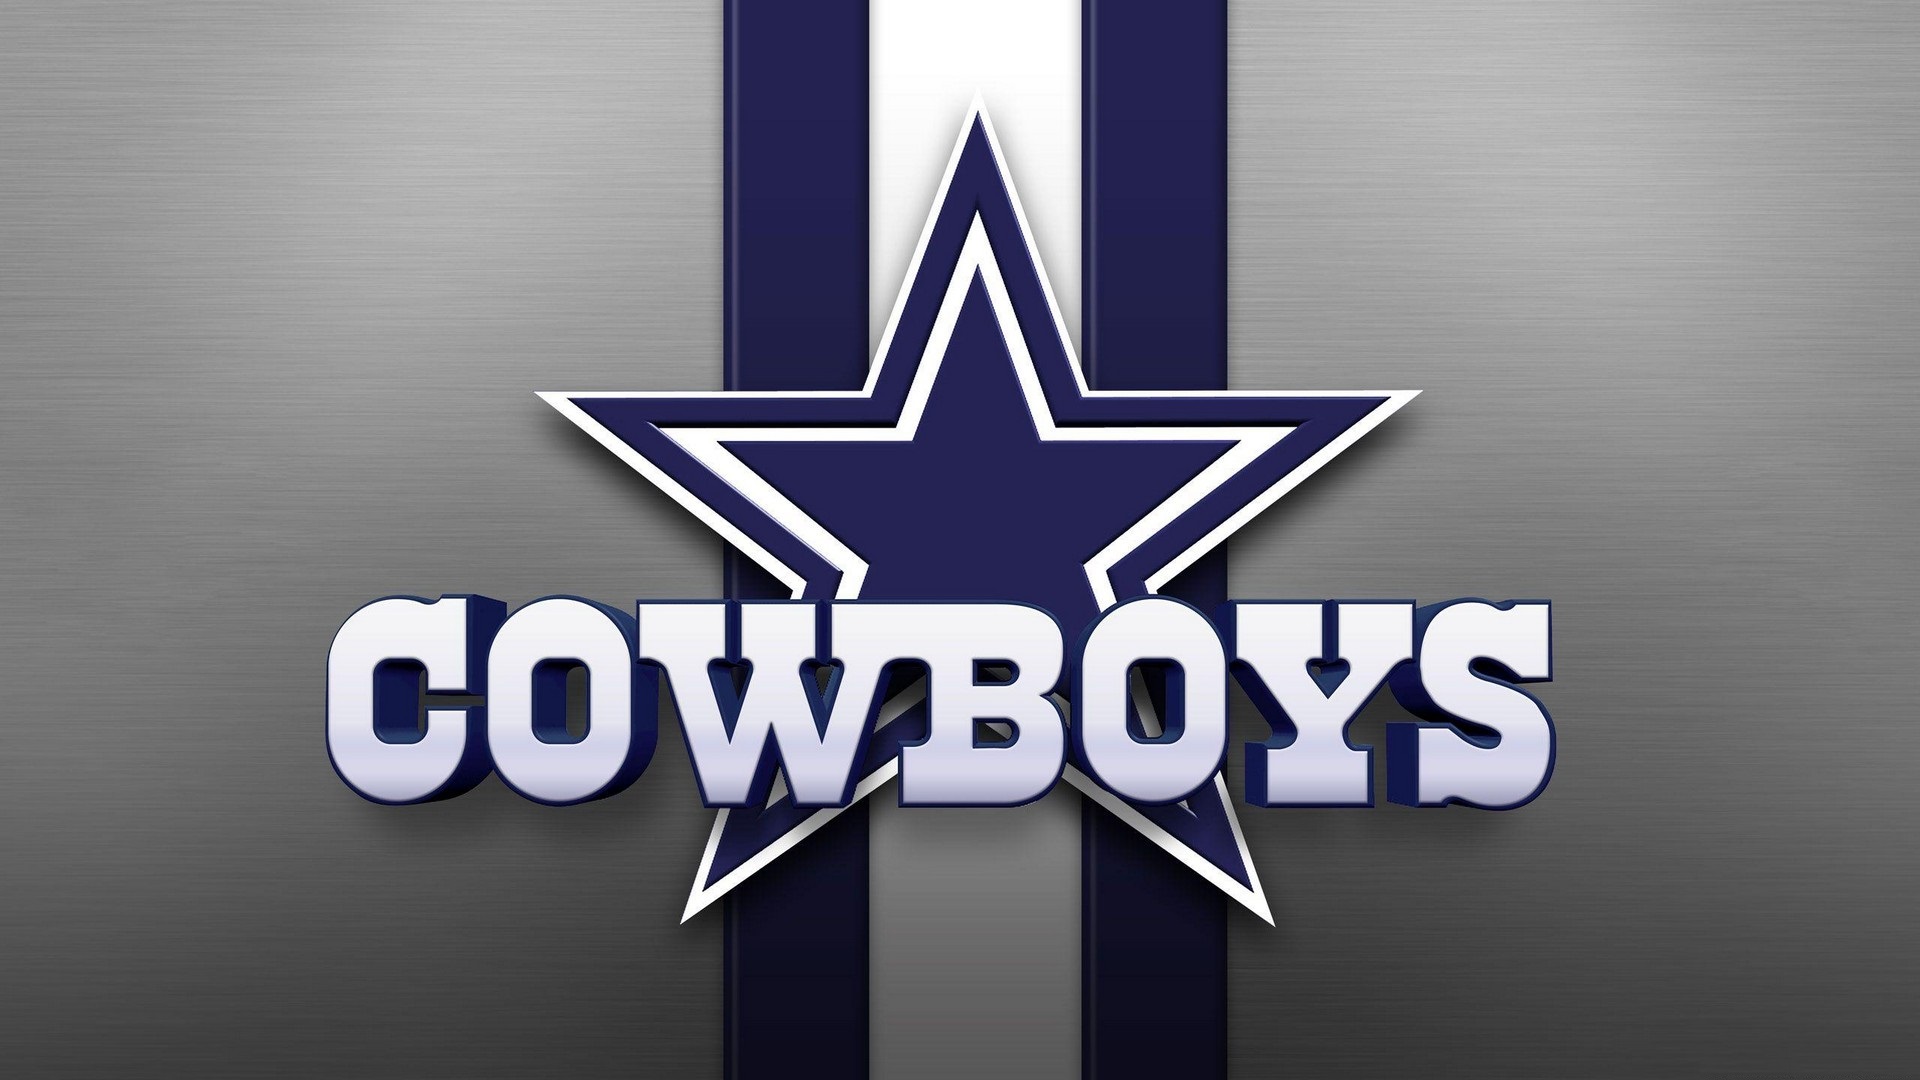 Dallas Cowboys Laptop Wallpaper with high-resolution 1920x1080 pixel. Download and set as wallpaper for Desktop Computer, Apple iPhone X, XS Max, XR, 8, 7, 6, SE, iPad, Android